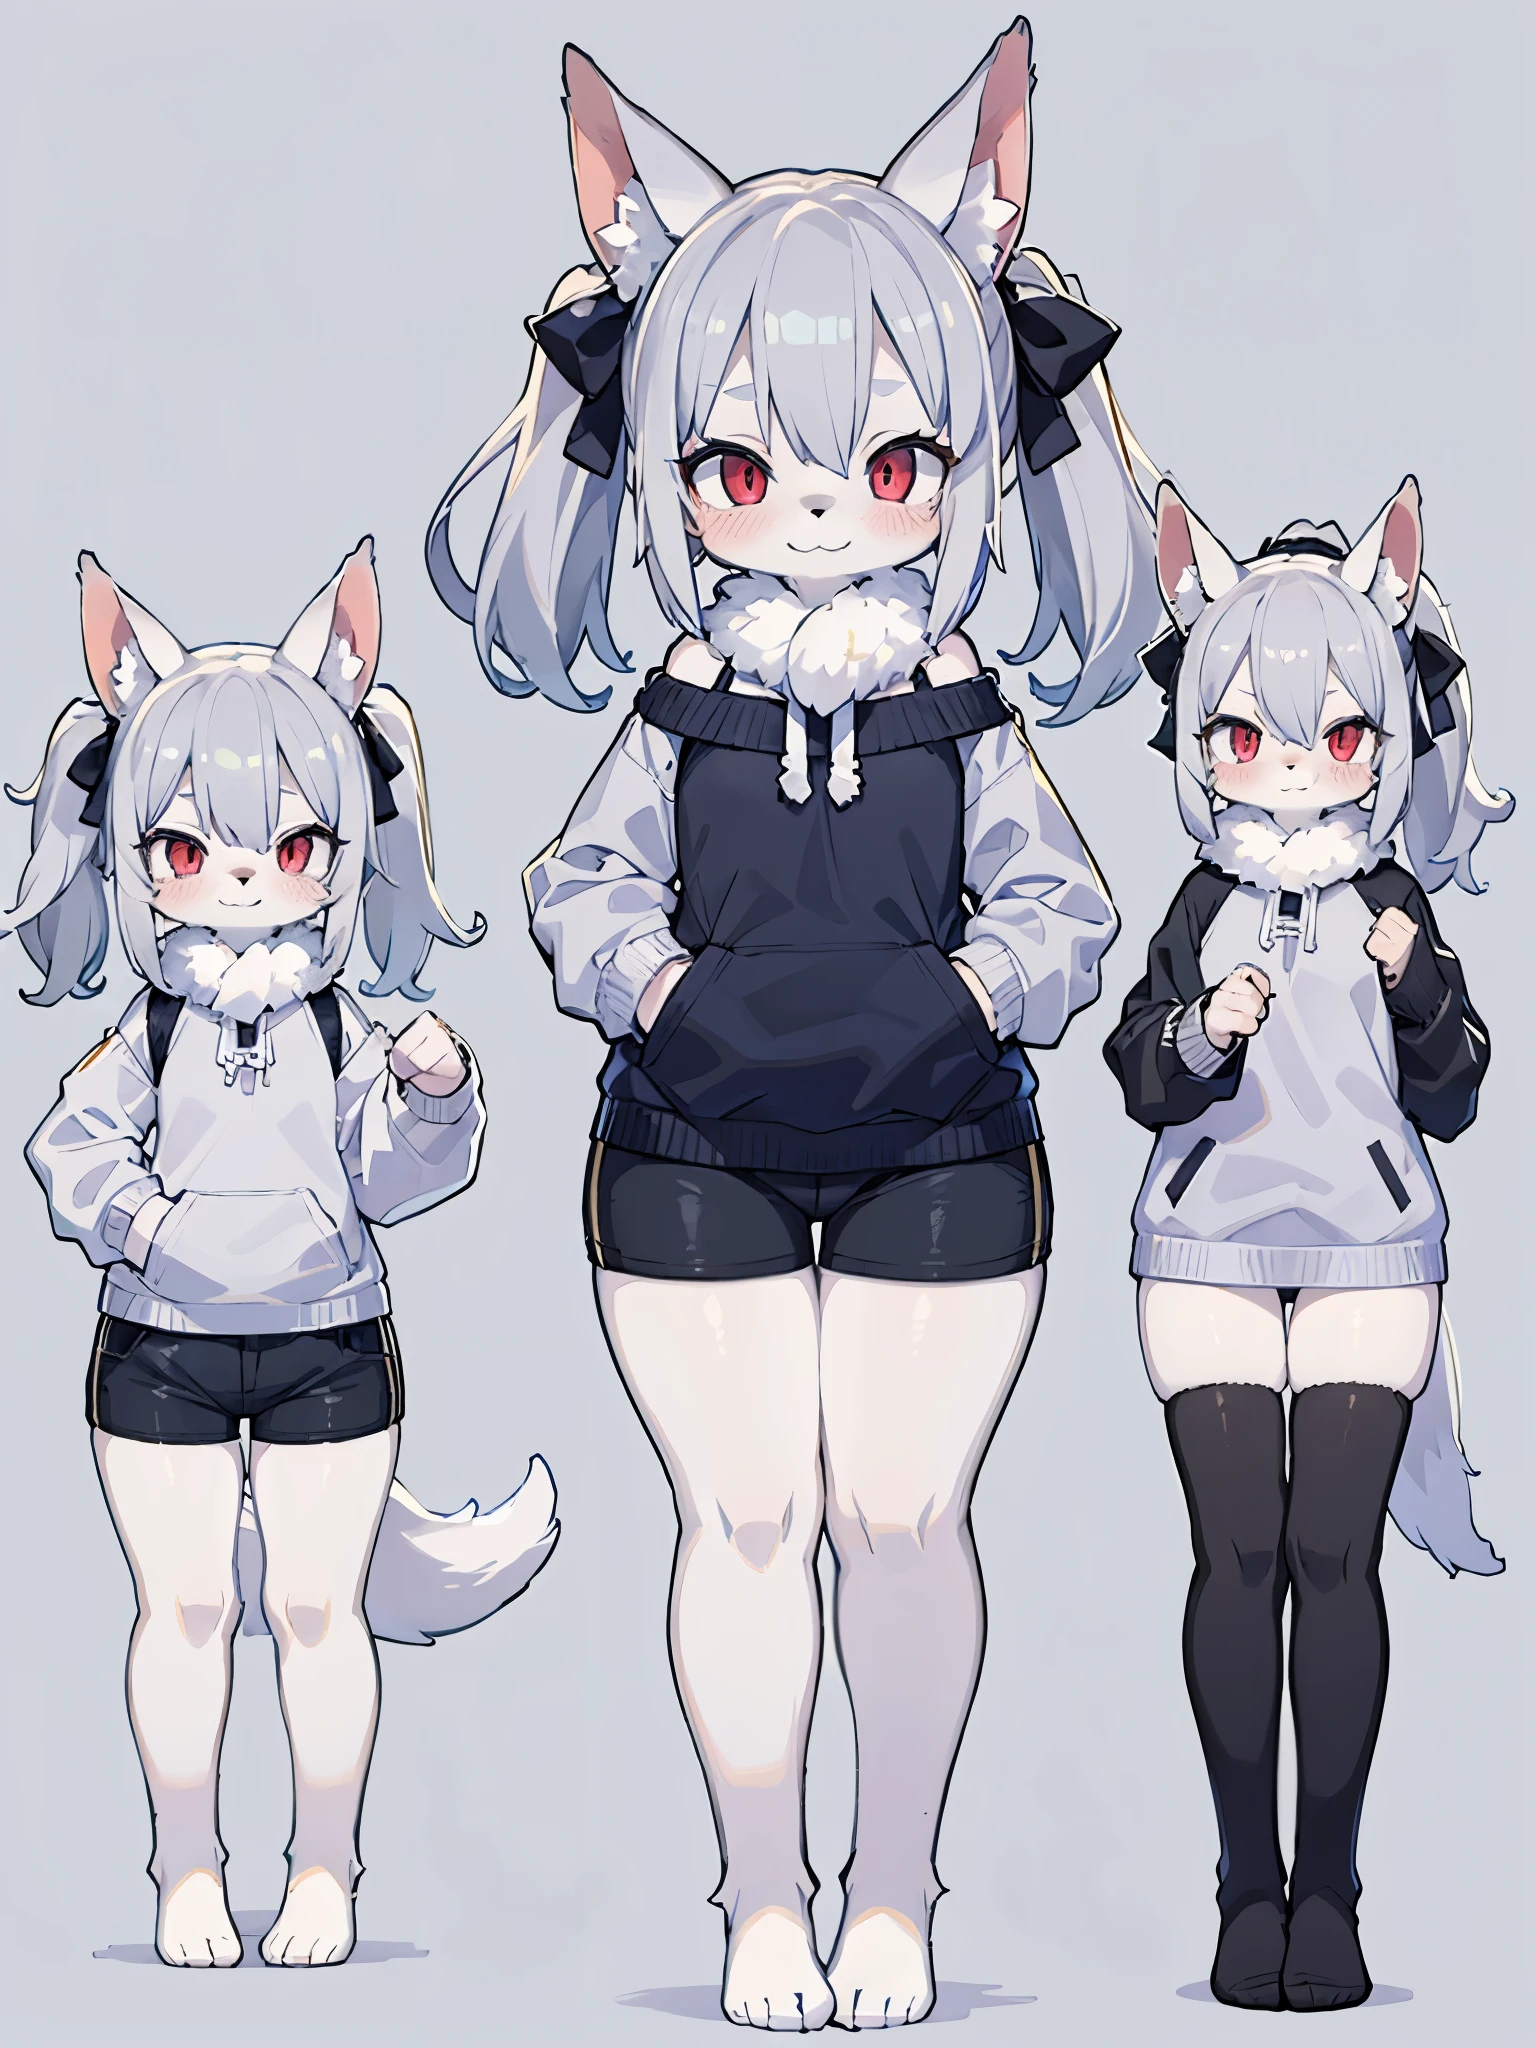 ((Best quality)), ((Masterpiece)), (detailed), ((Masterpiece, highest quality)), ((high quality)), ((Absurd resolution)), ((full body)), ((1 solo girl)), ((2d design)), leg fur, gray color wolf ears, gray color wolf tail, solo, 1girl, full body, standing, looking at viewer, full length character, looking forward, character in the center of the image, detailed body, symmetrical body, both hands resting downwards, legs apart, standing posture, full body concept, neutral posture, furry girl, no shoes, thighs exposed, stomach exposed, short hair, hair that reaches the shoulders, anime girl, perfect face, slim body, hungry, skinny body, teen anime, simple white background, ultra-fine fur, crossed bangs, hairline, shiny hair, lone nape hair, the smiley face has a faint blush, smiley, sleepy, light blush, small ponytail on each side, hair bow, pigtails with bow, pigtails of the same size, mane of white fur on the neck, long mane that covers the shoulders, entire neck covered by white mane, fur color cream, gray hair, red eyes, white sweater, black plain sports shorts, leg fur of the same size, legs exposed, legs with fur up to the thighs, thighs without fur, bright white fur on legs, sweater that reaches up to the ribs, sleeveless sweater, sweater top, sports sleeves full of white fur,